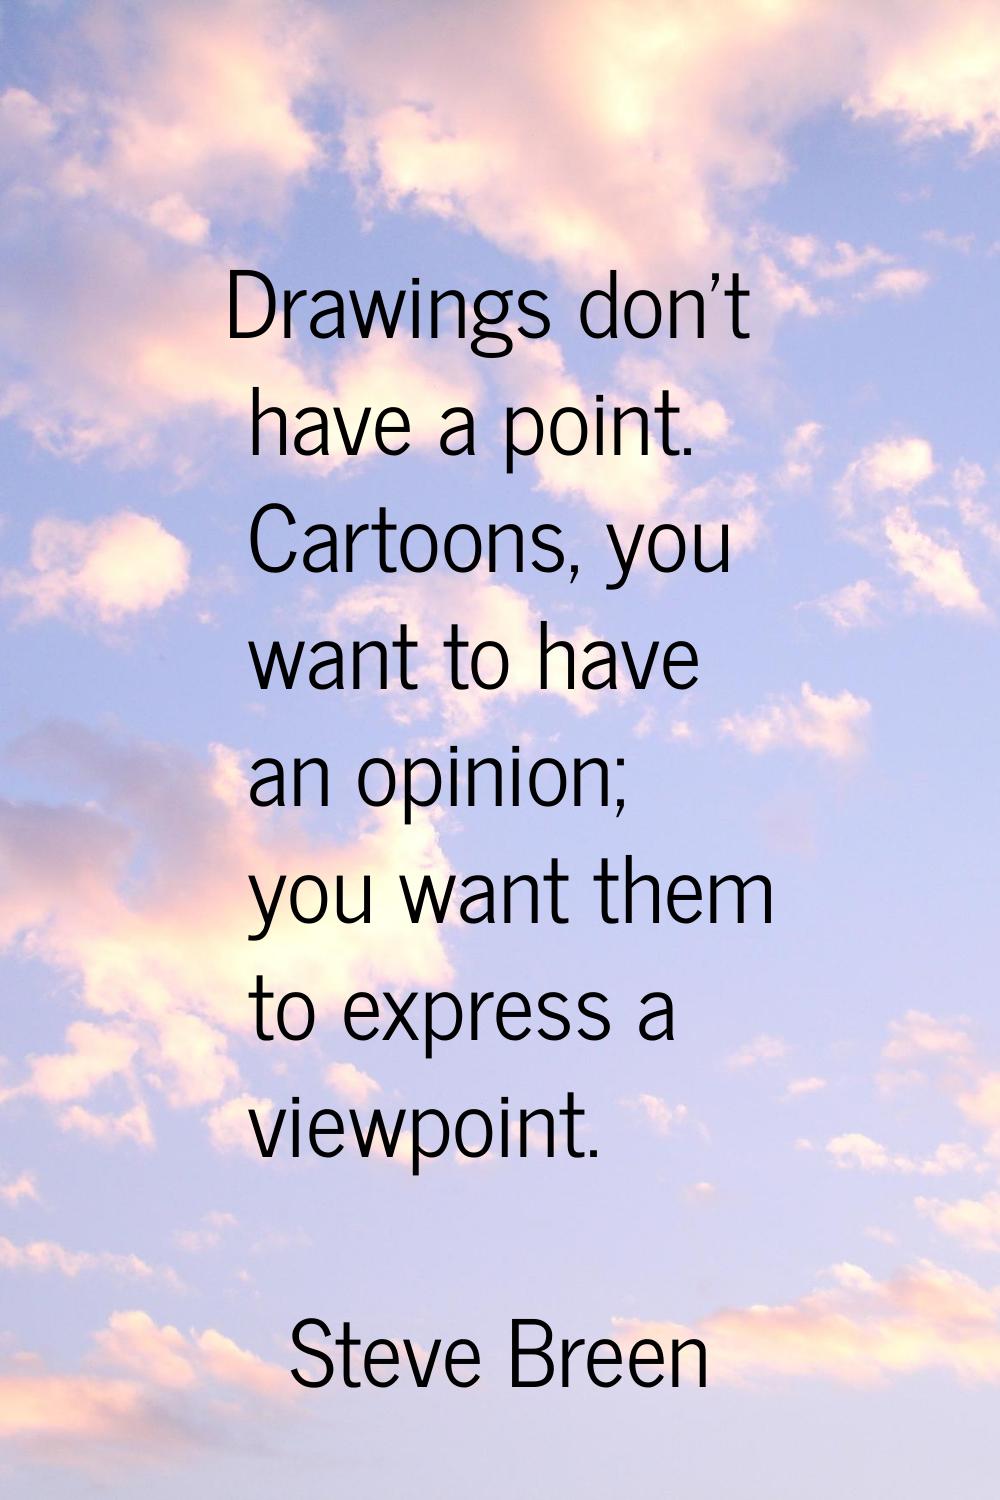 Drawings don't have a point. Cartoons, you want to have an opinion; you want them to express a view